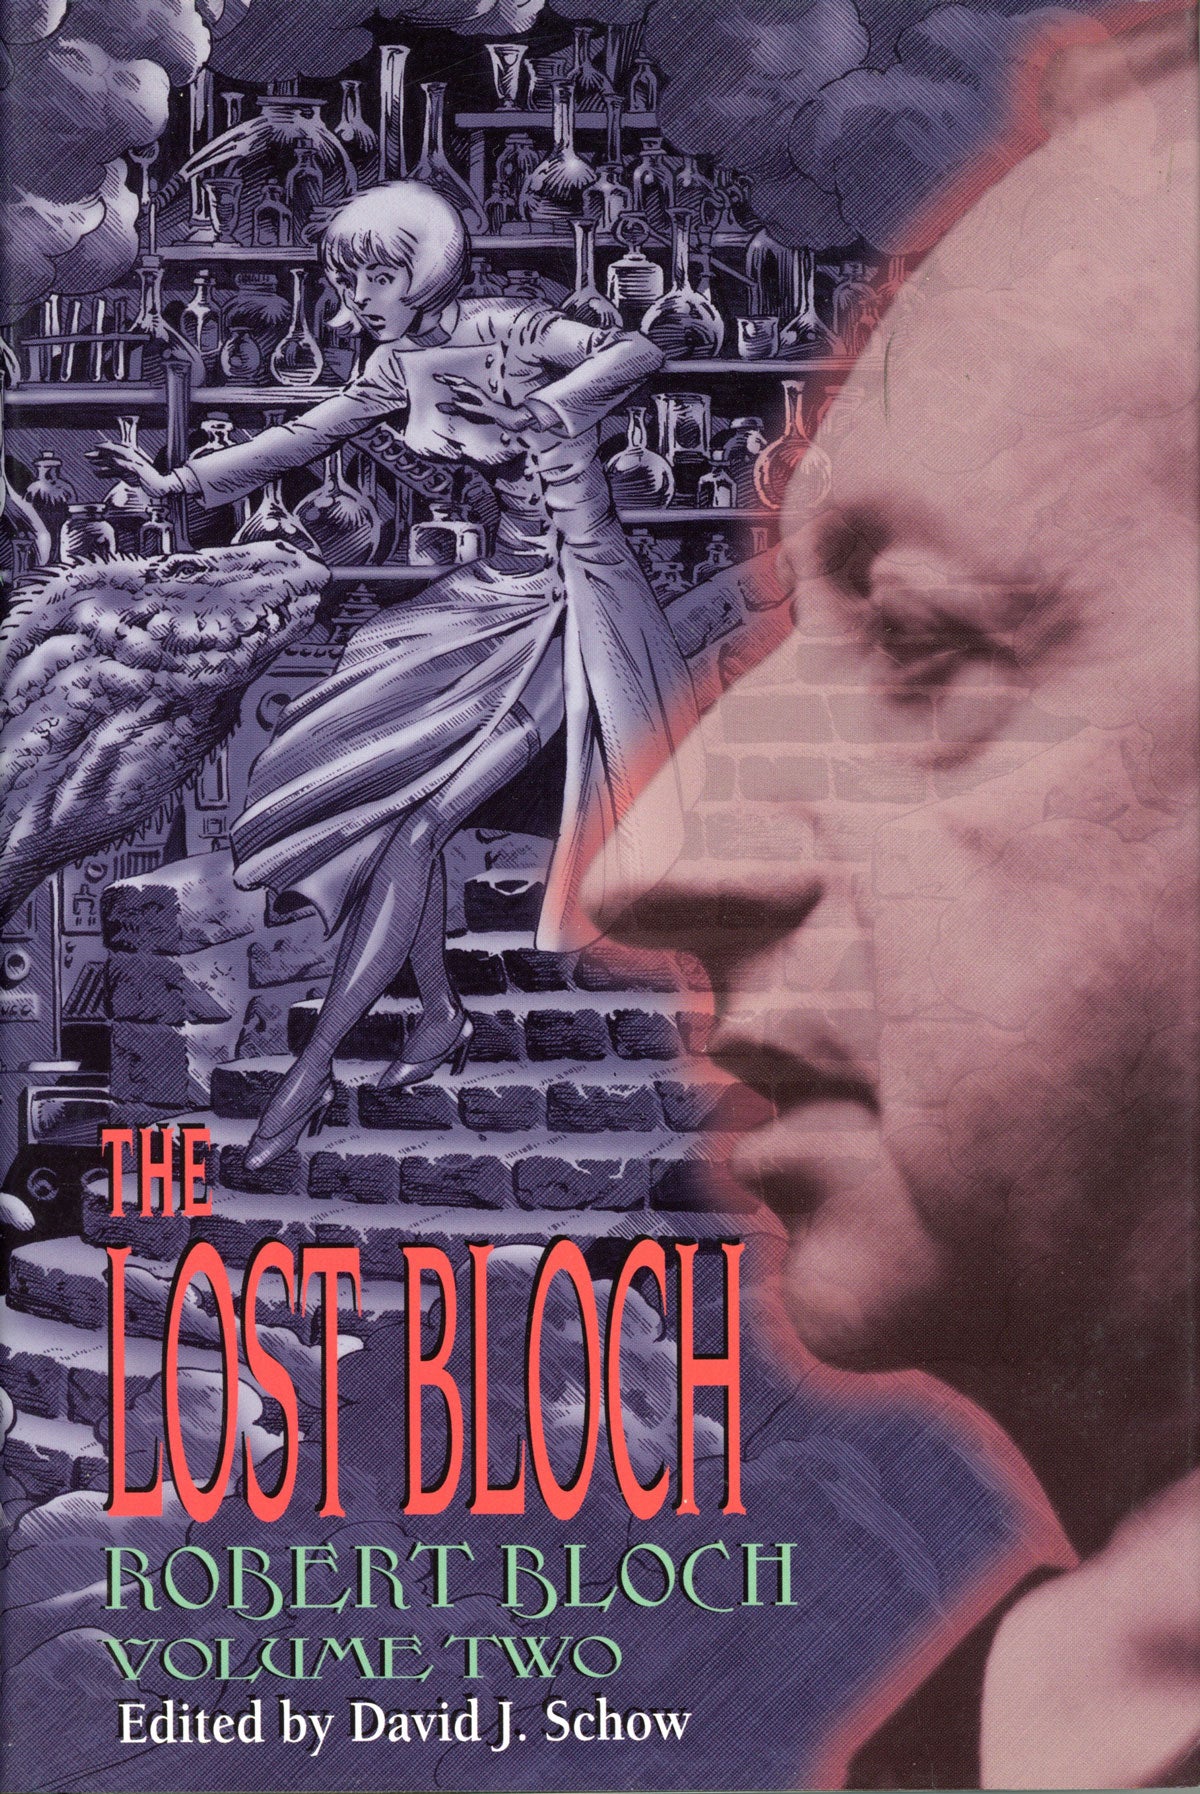 HELL ON EARTH THE LOST BLOCH VOLUME II by Robert Bloch on L. W. Currey Inc